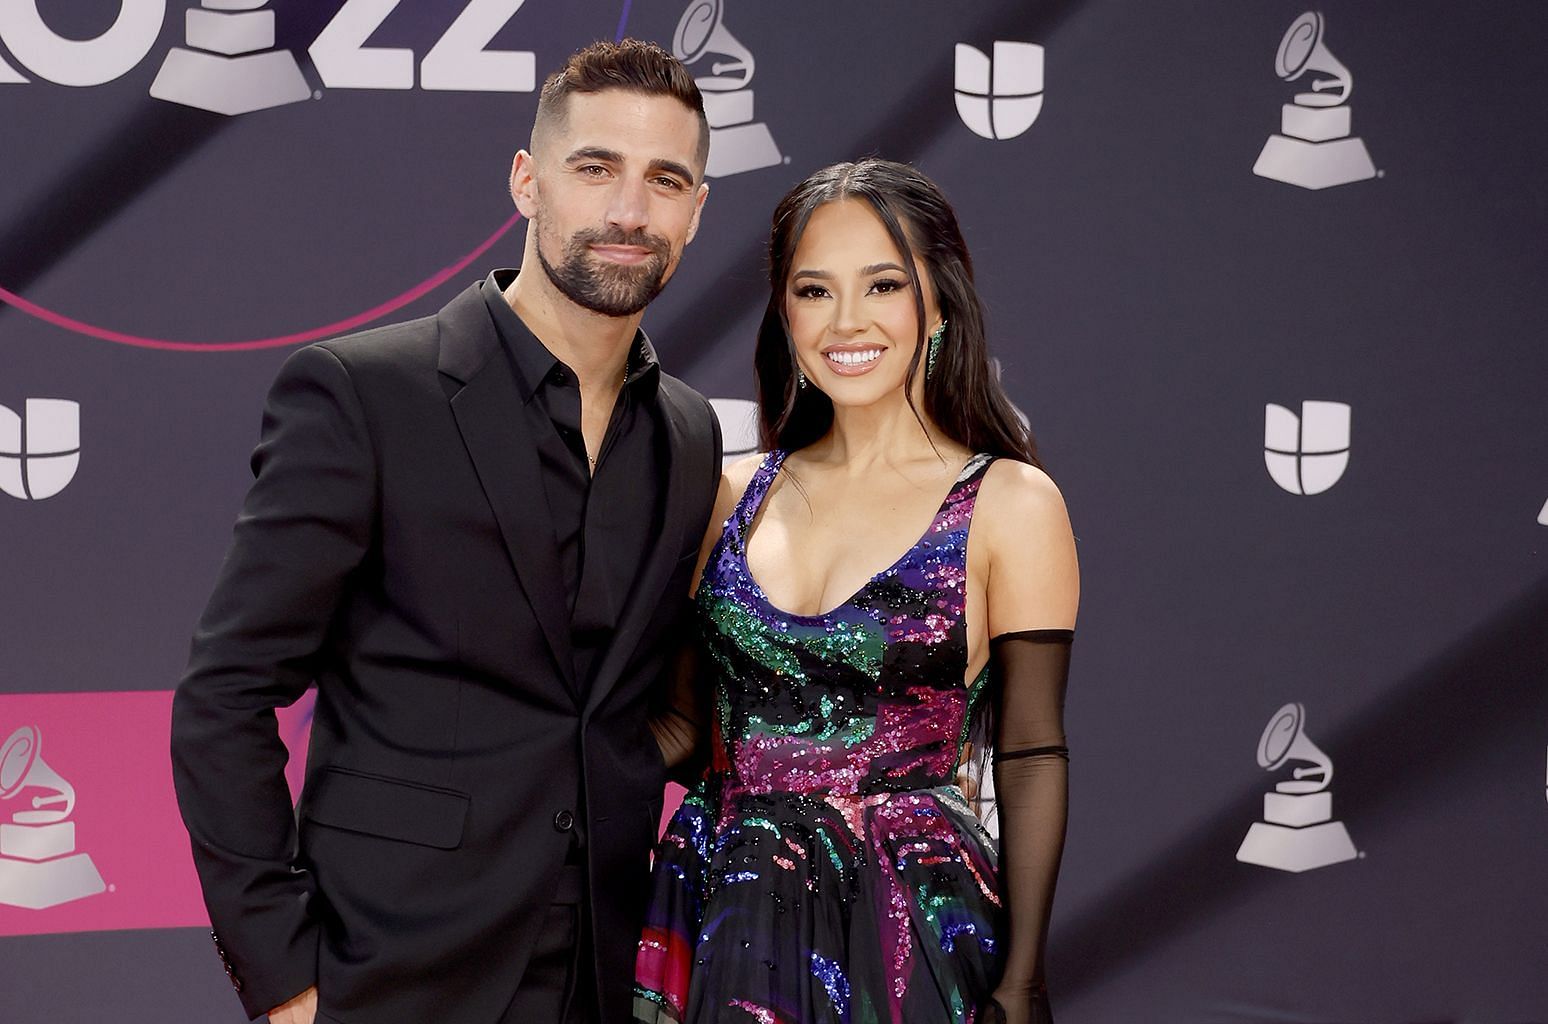 Details explored about Becky G and Sebastian cheating scandal: Reactions explored. (Image via Getty Images)